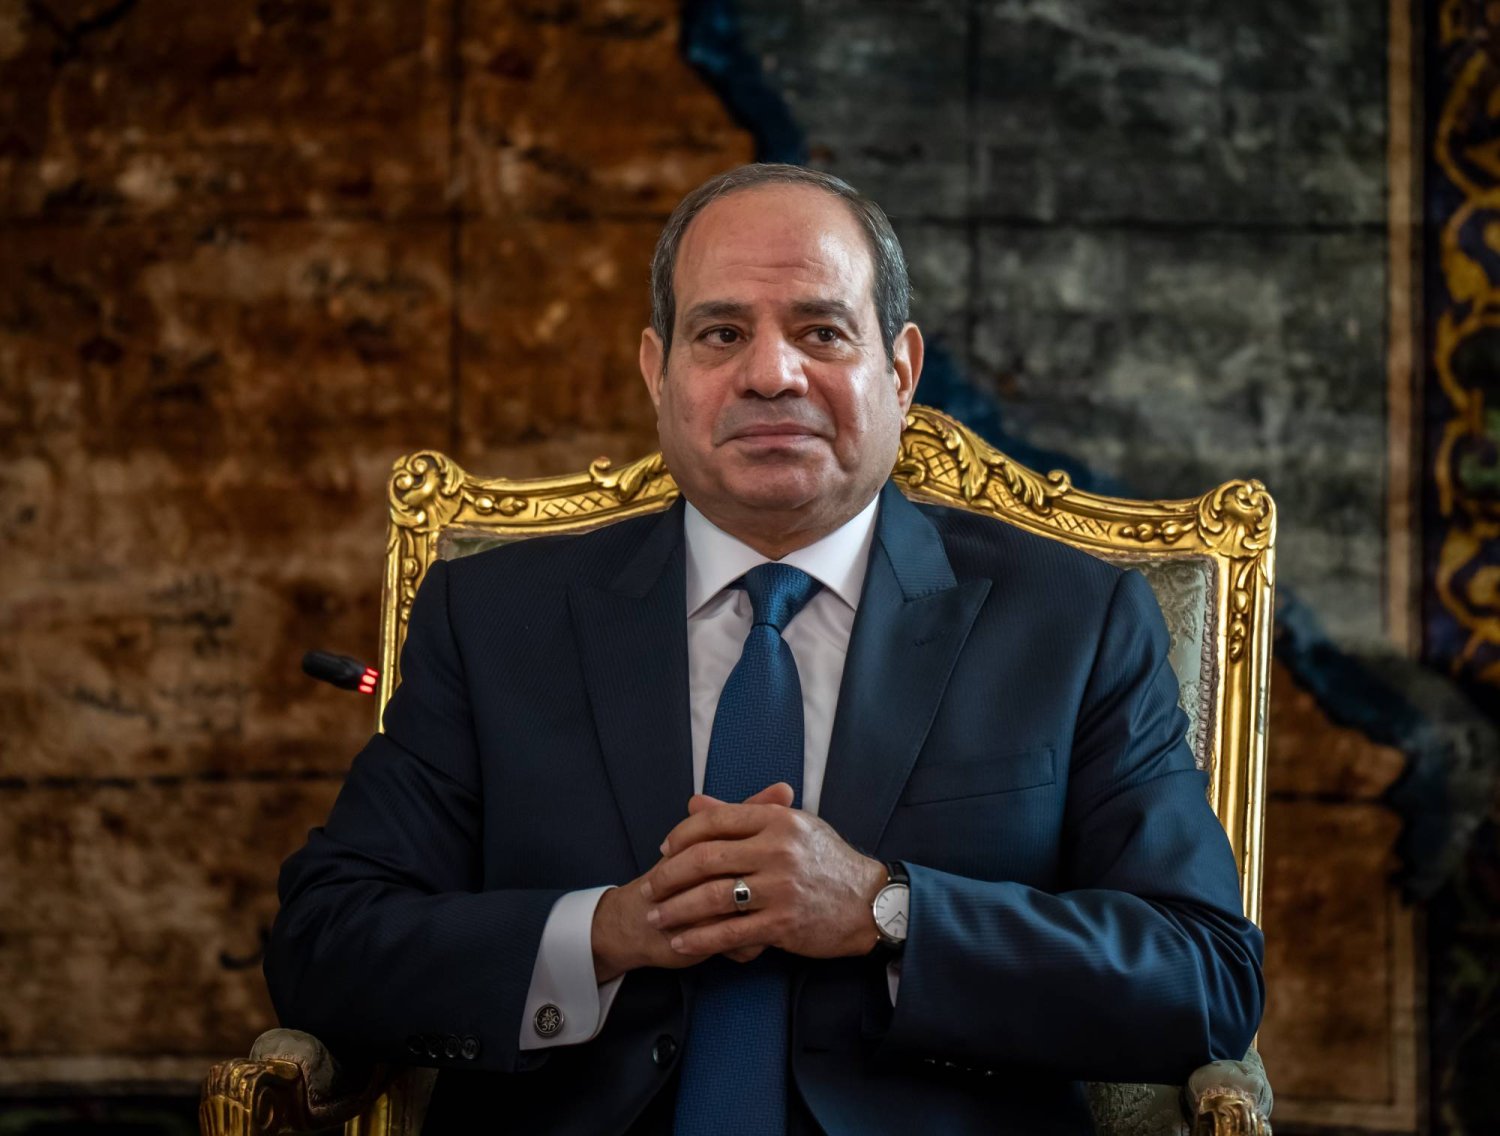 FILED - 18 October 2023, Egypt, Cairo: President of Egypt Abdul Fattah al-Sisi is pictured in Cairo. Photo: Michael Kappeler/dpa Pool/dpa